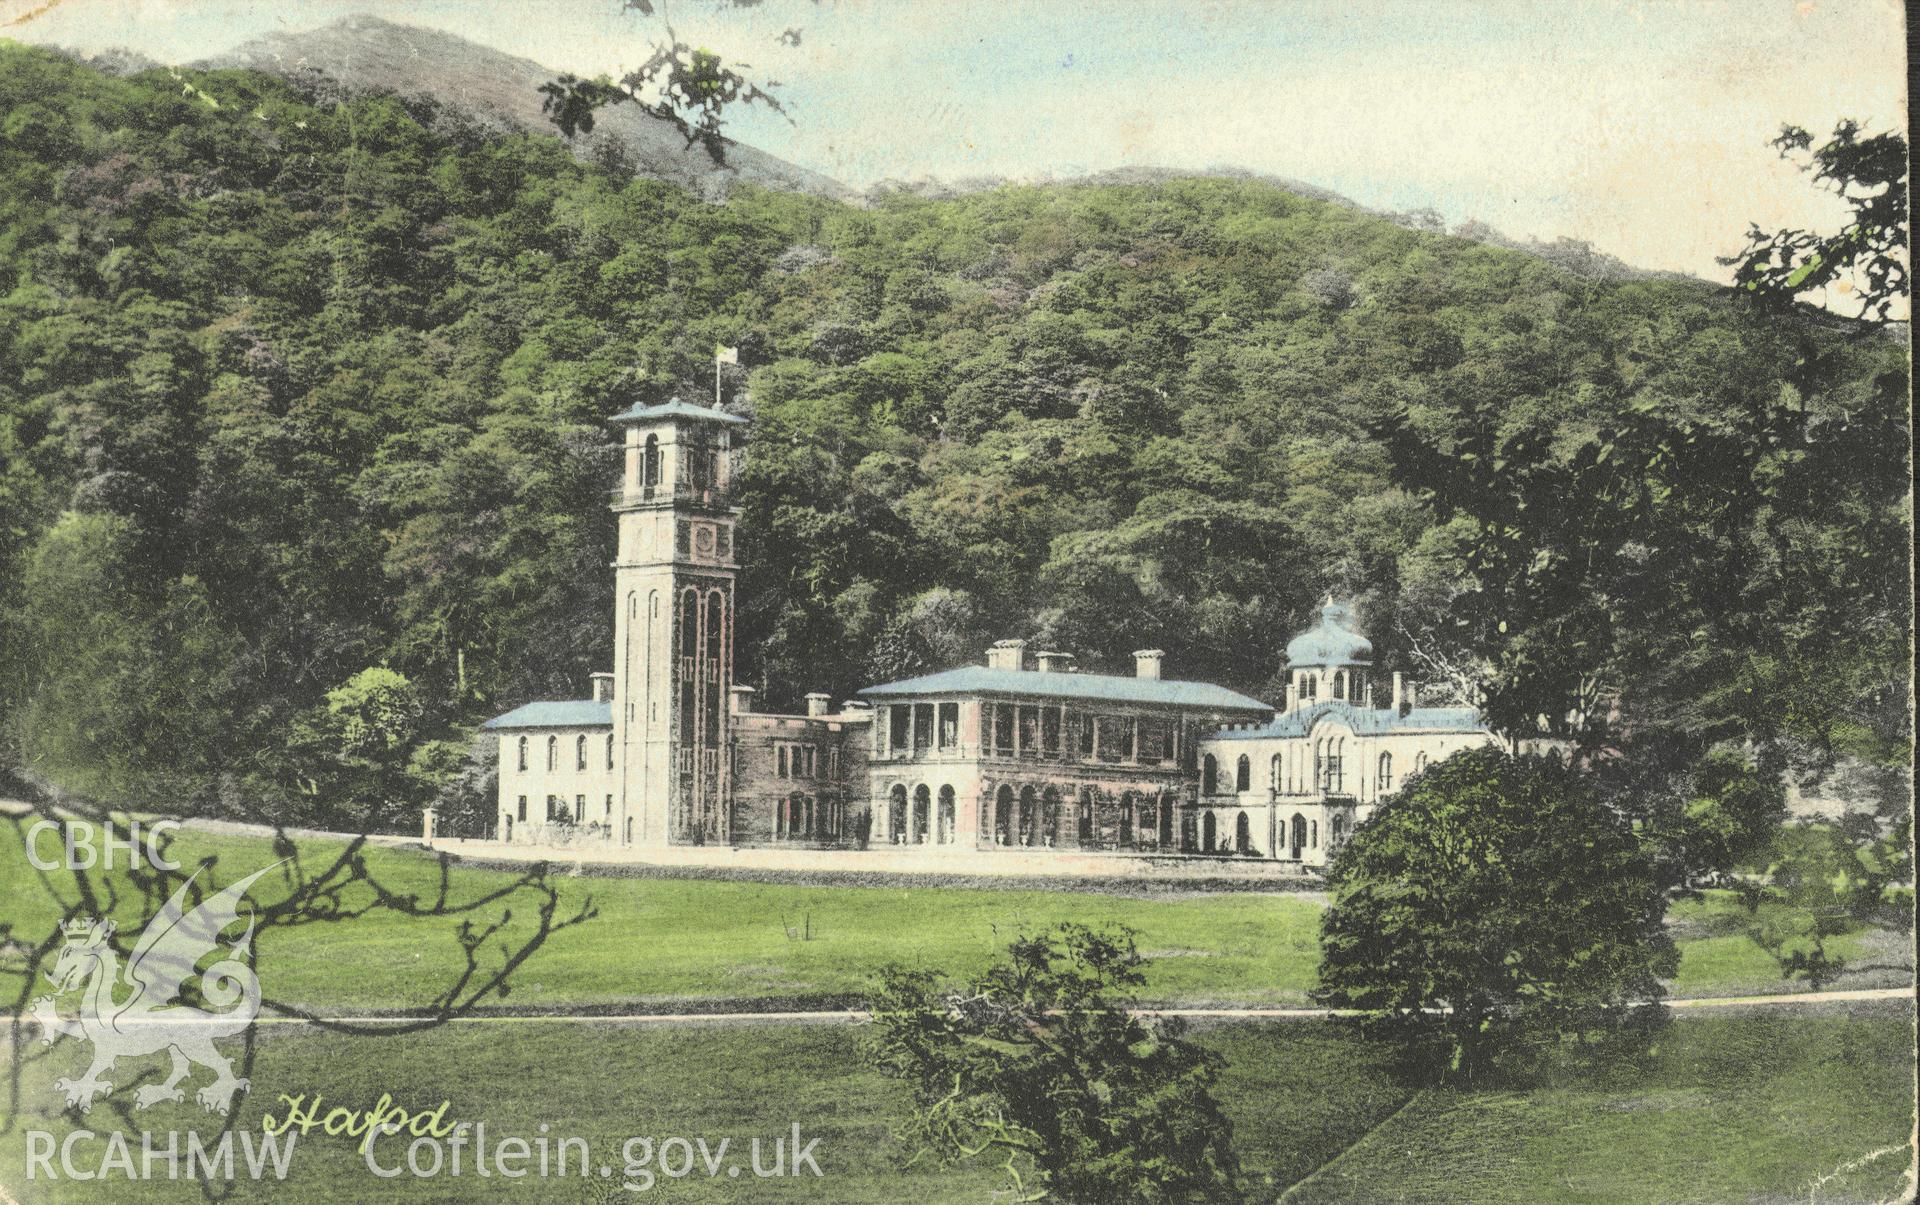 Digitised postcard image of Hafod Uchtryd mansion. Produced by Parks and Gardens Data Services, from an original item in the Peter Davis Collection at Parks and Gardens UK. We hold only web-resolution images of this collection, suitable for viewing on screen and for research purposes only. We do not hold the original images, or publication quality scans.